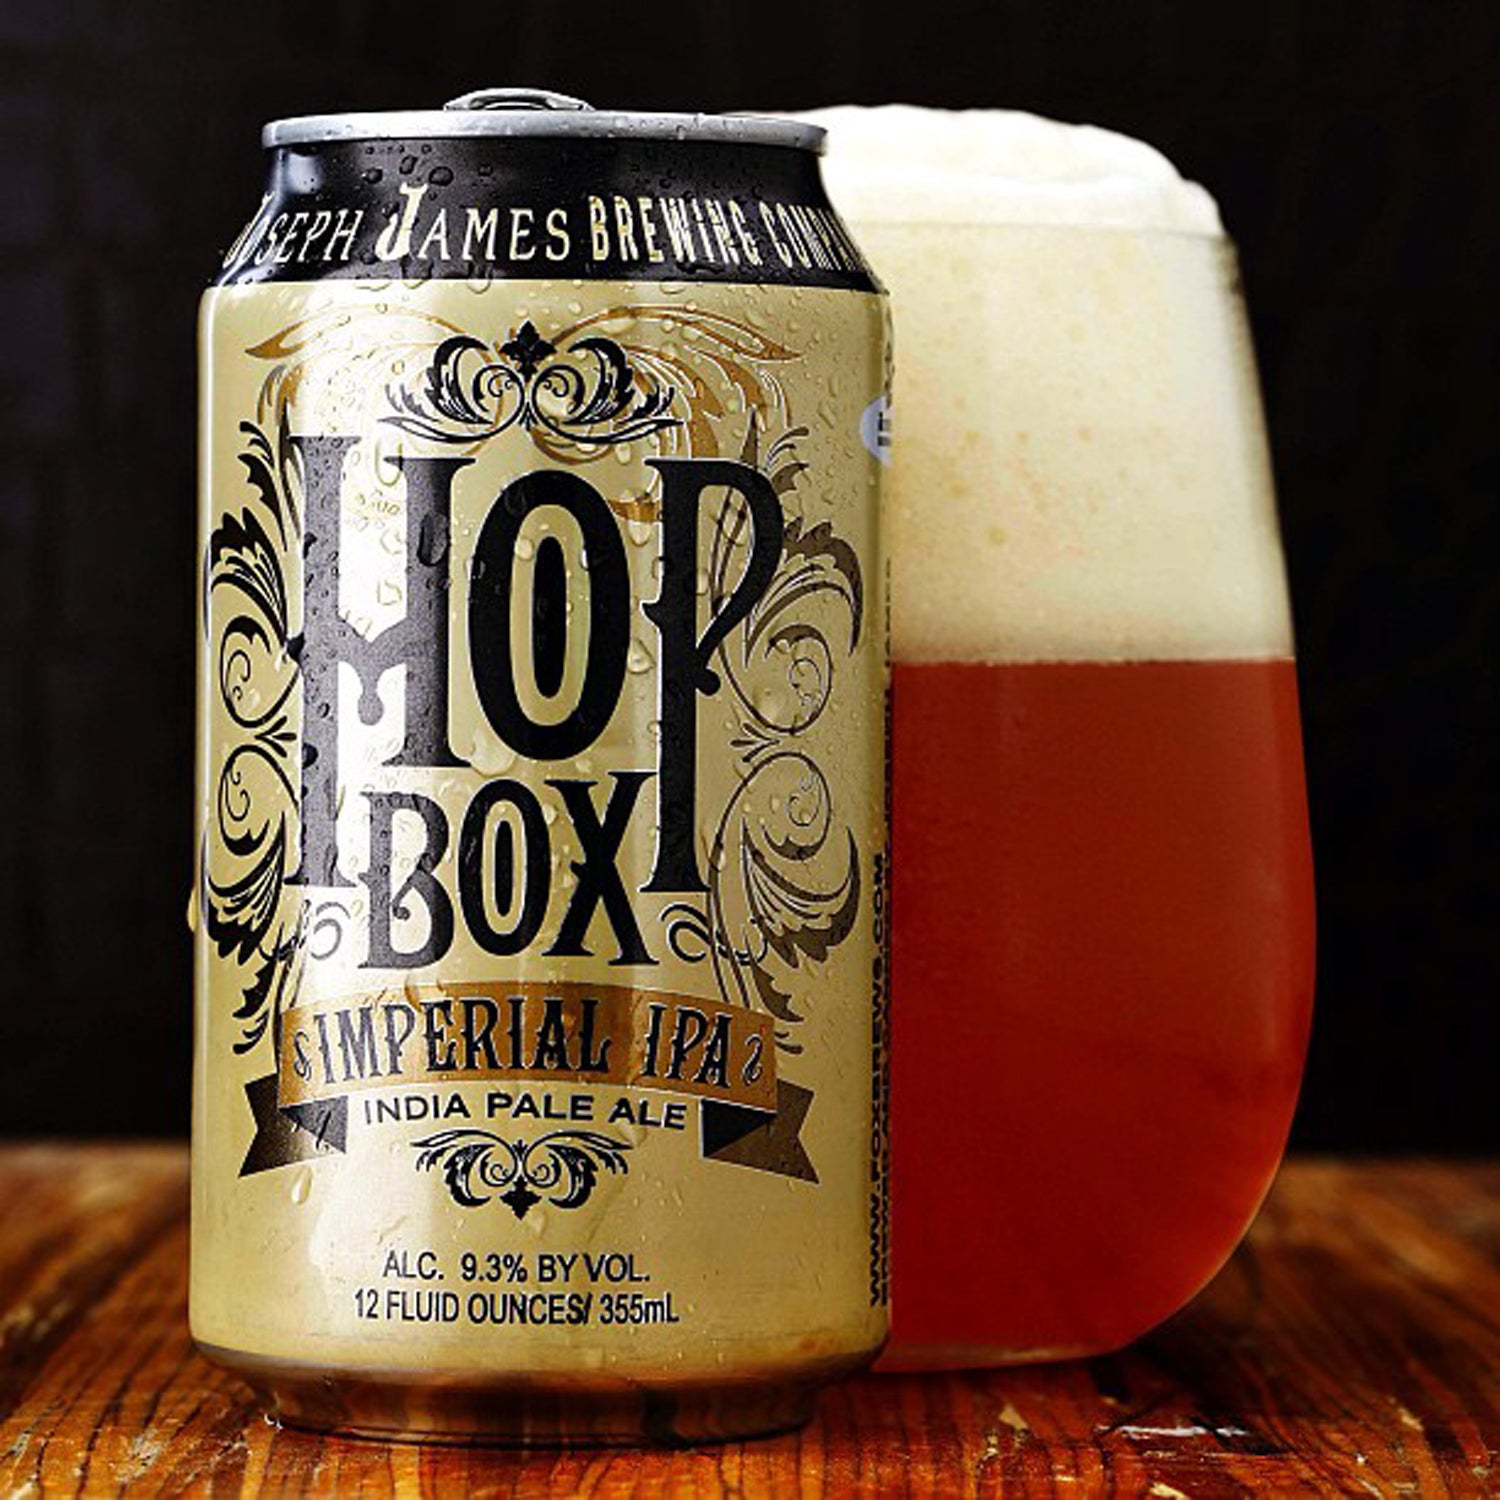 Joseph James Brewing hop box imperial ipa outside canned beer fall hiking or camping